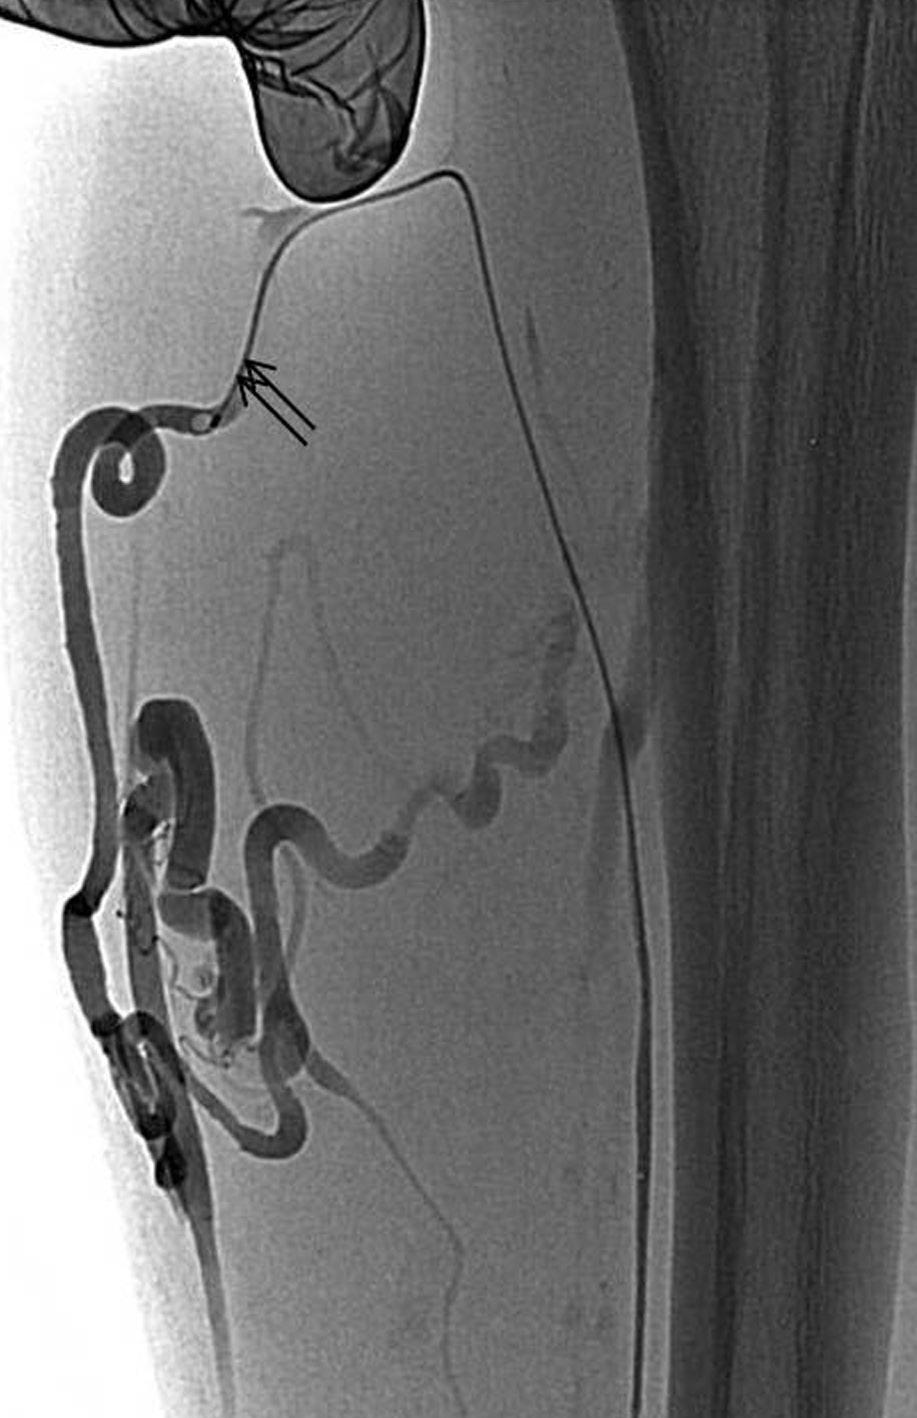 6-Fr microcatheter was placed into the guiding catheter coaxially, selective catheterization of the varicose tributaries followed by a venogram through the microcatheter was performed, to ascertain